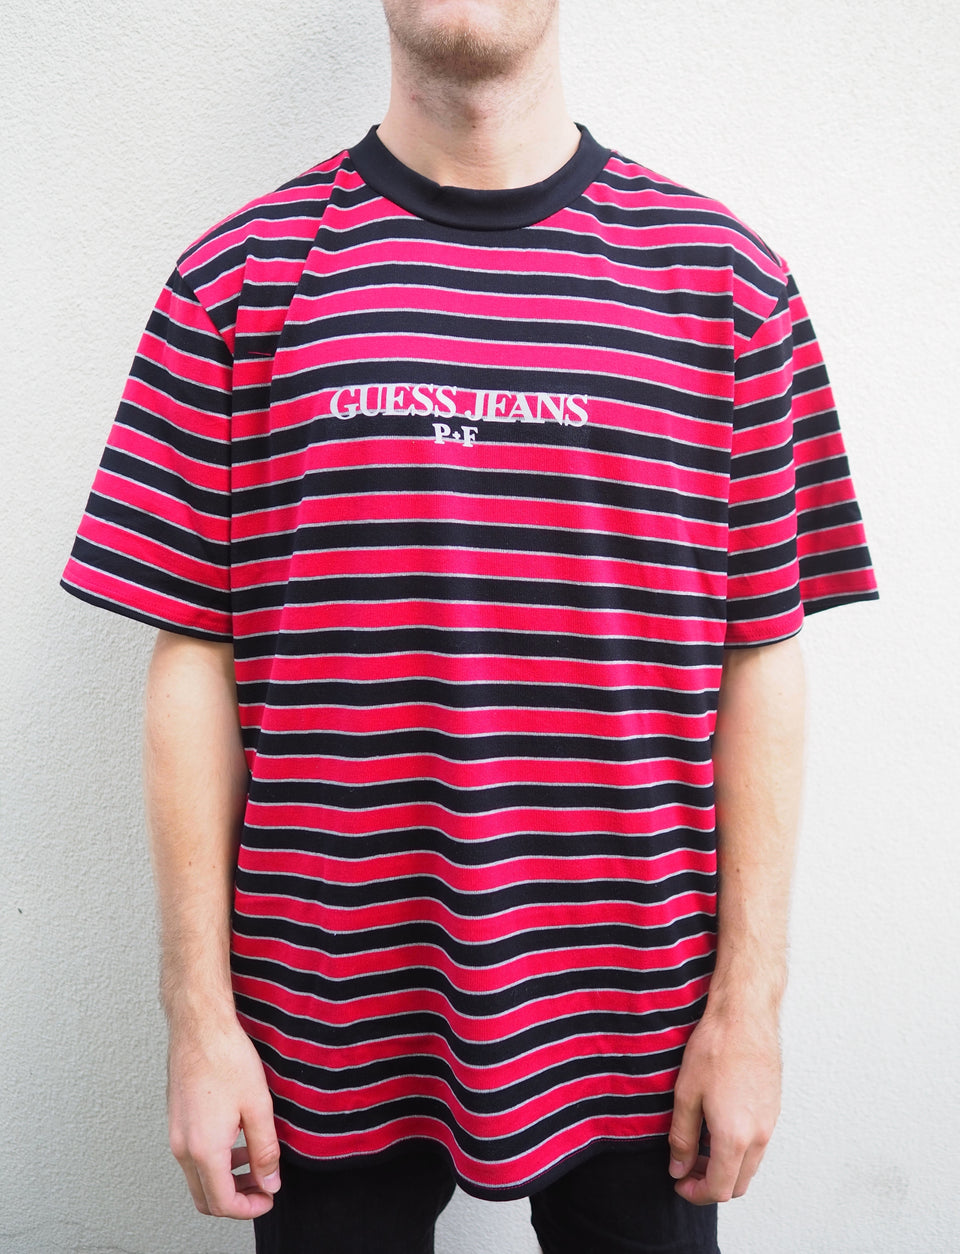 red and black guess shirt